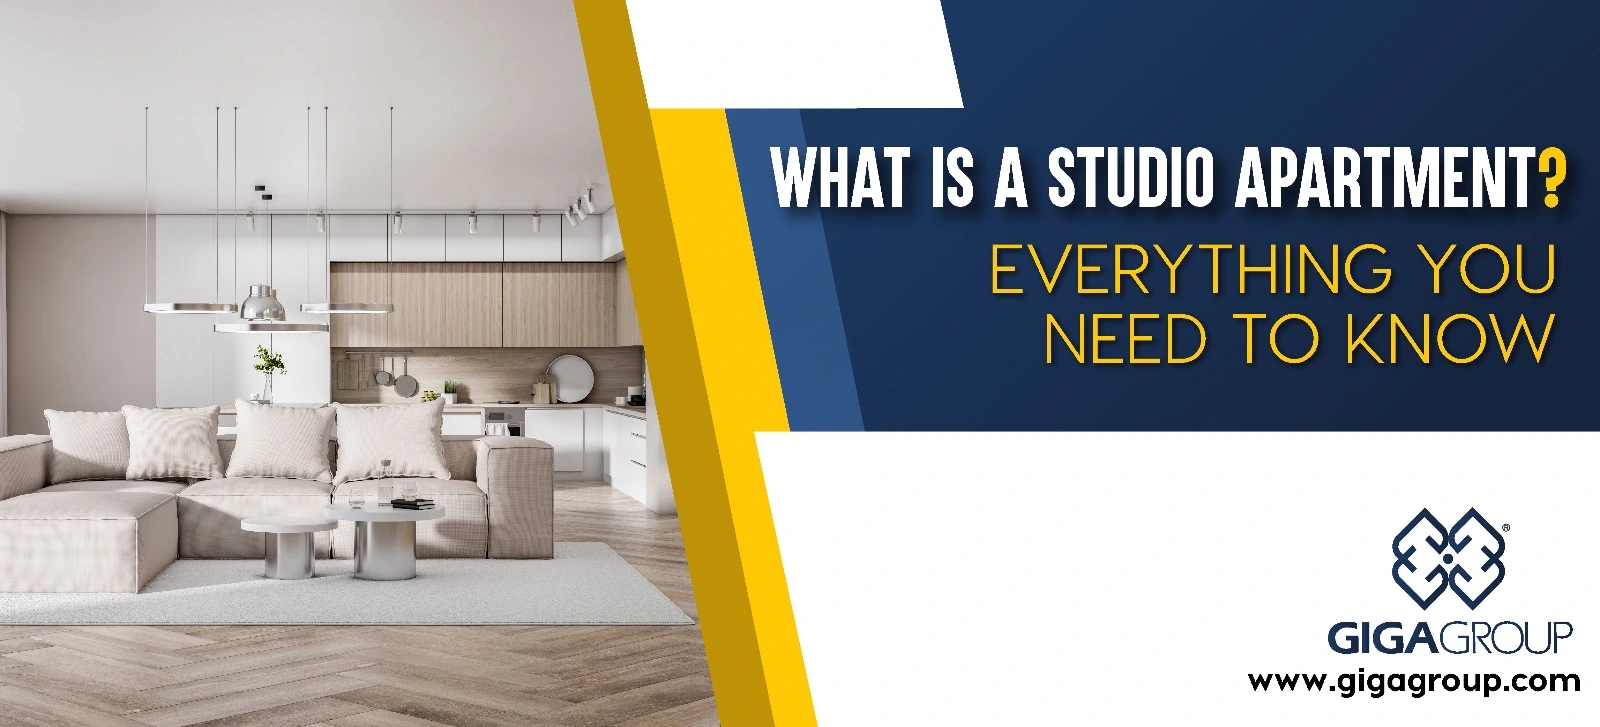 What is a Studio Apartment?